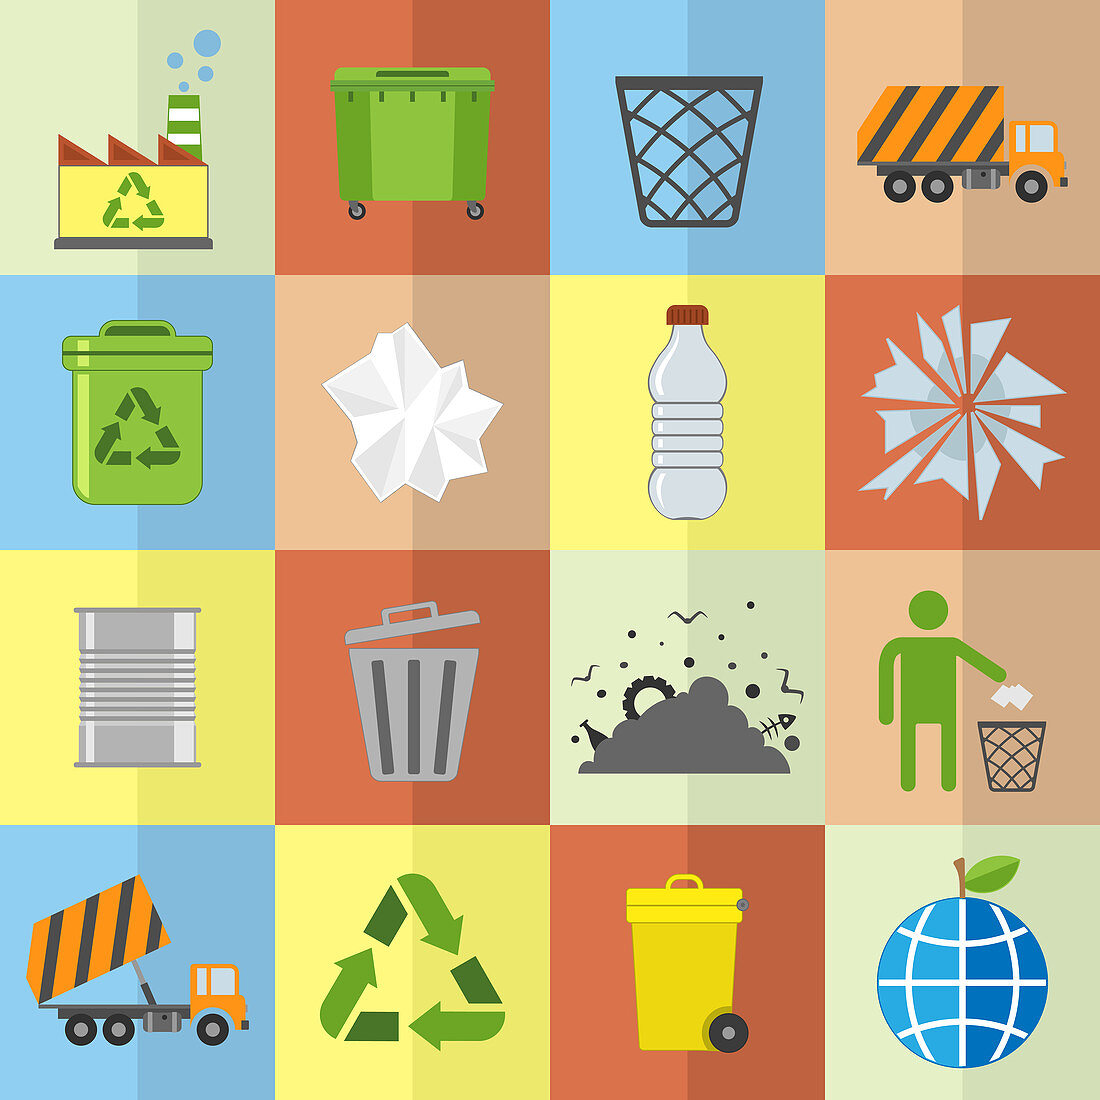 Recycling icons, illustration